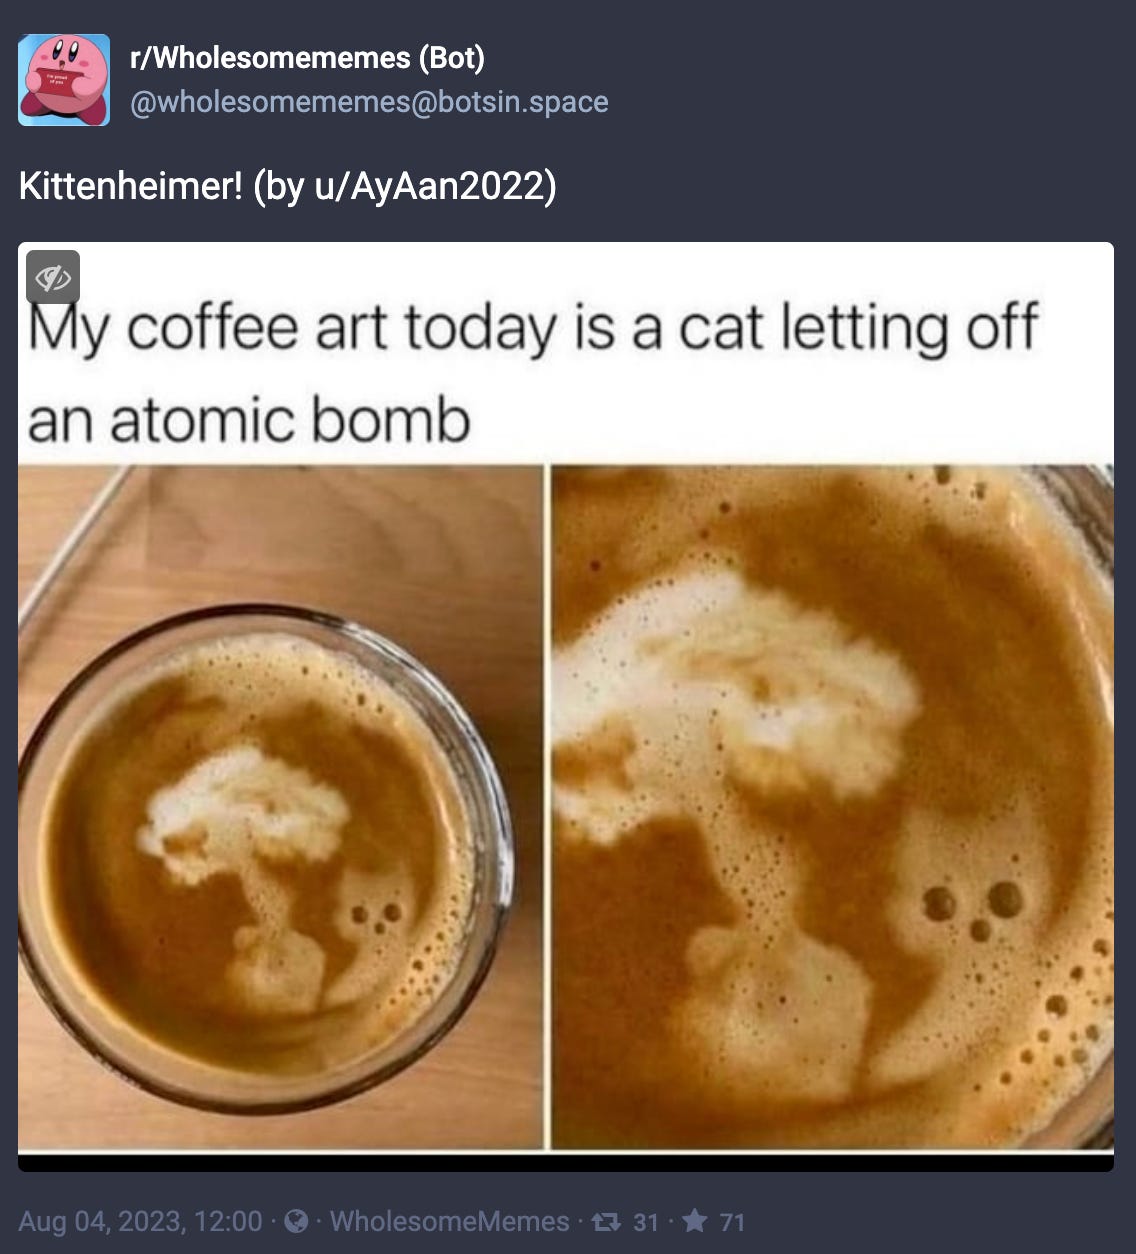 Latte art of a mushroom cloud & a shocked cat. Caption: My coffee art today is a cat letting off an atomic bomb. Kittenheimer (by u/AyAan2022)